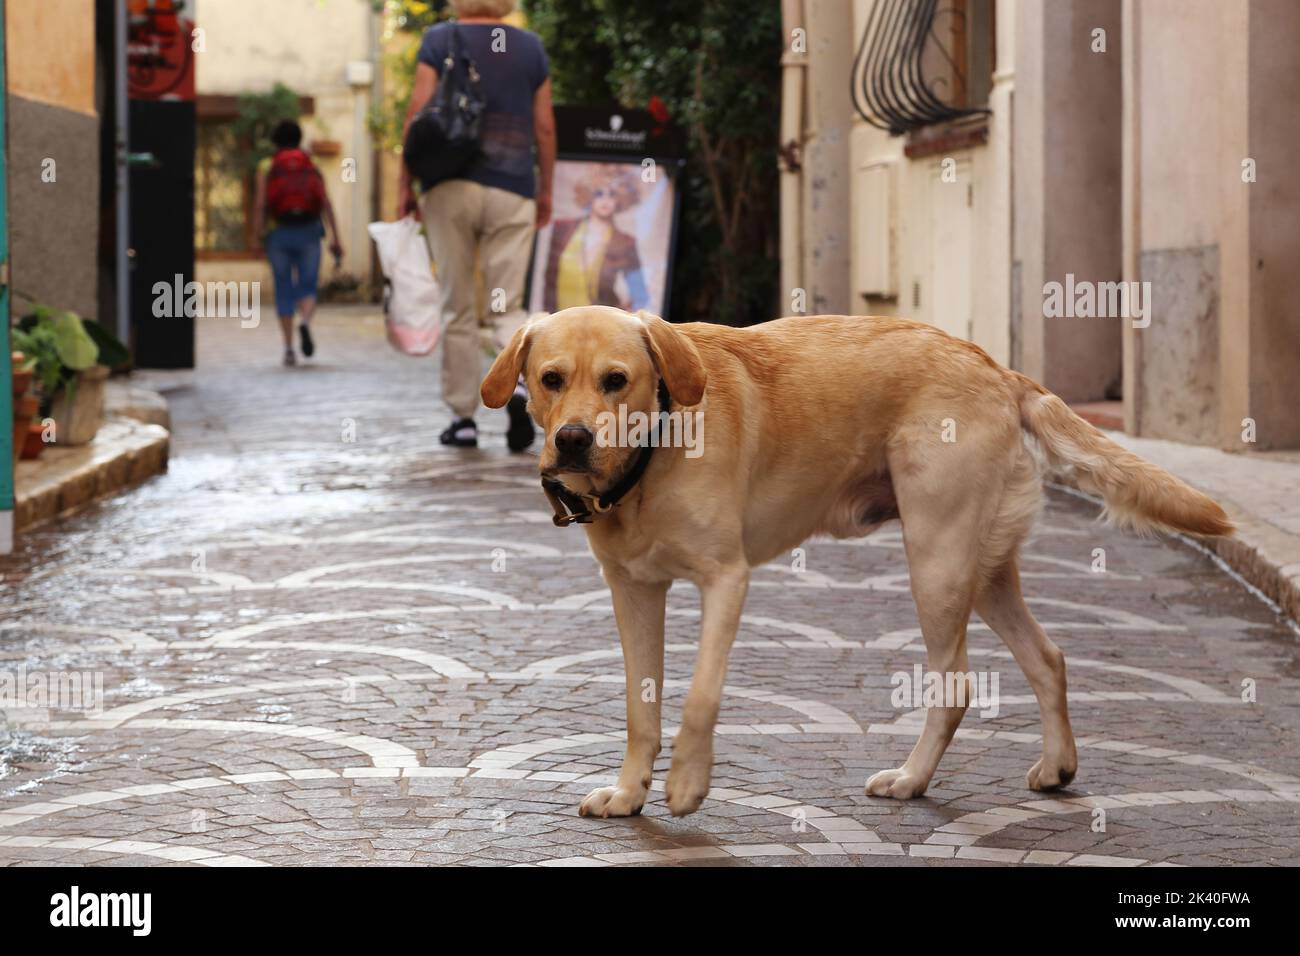 This is a dog roam freely without a host on one of the streets of the French seaside town. Stock Photo